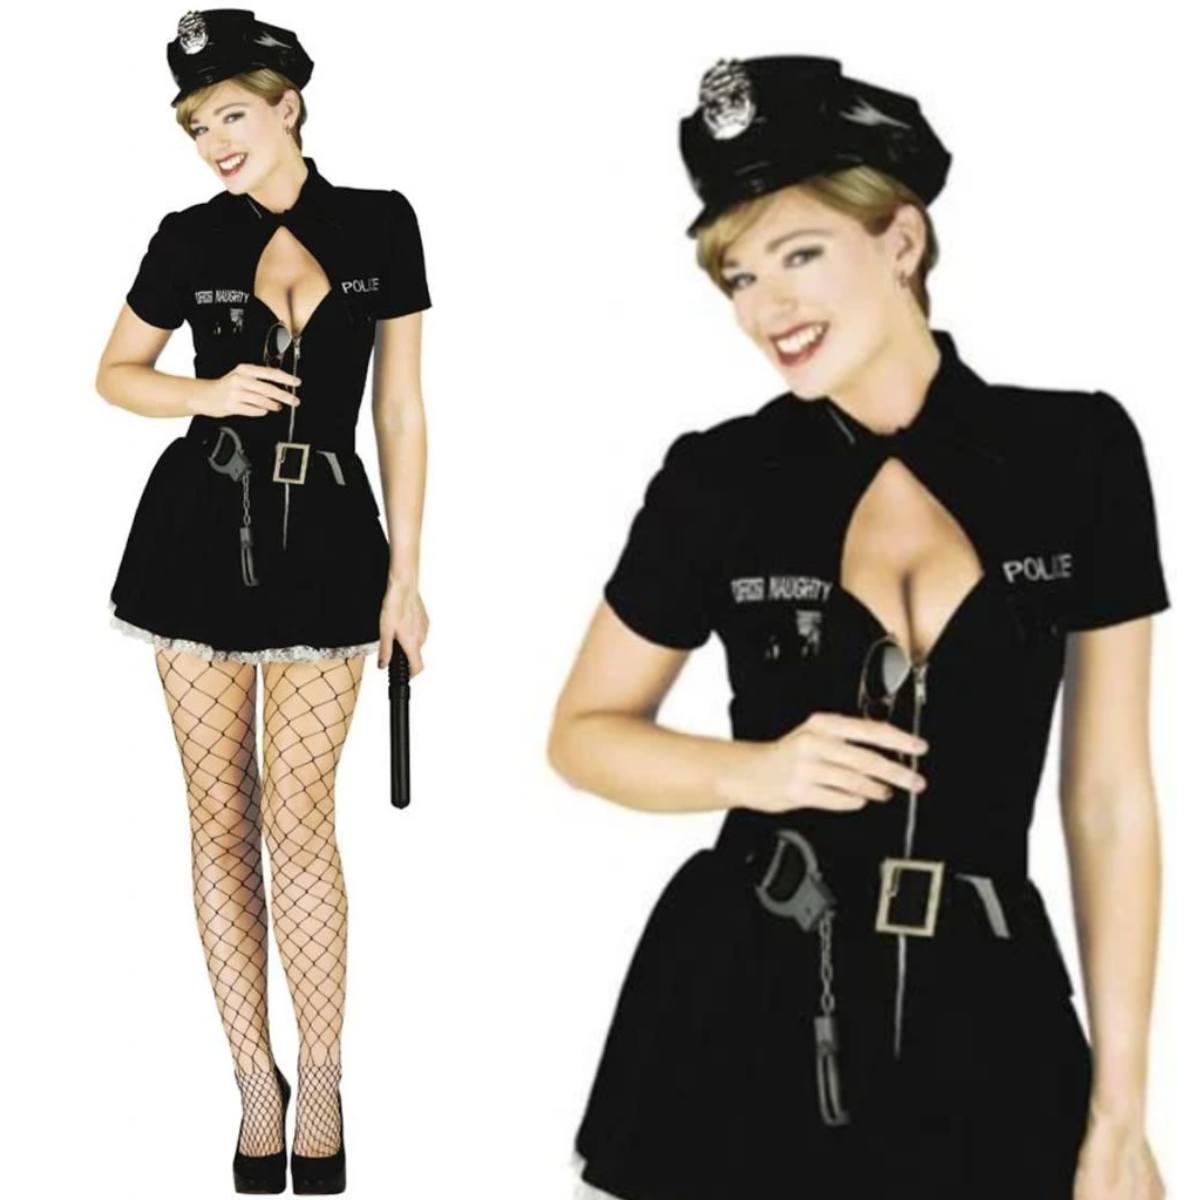 Officer Naughty Police Costume by Classified GW2351 available here at Karnival Costumes online party shop